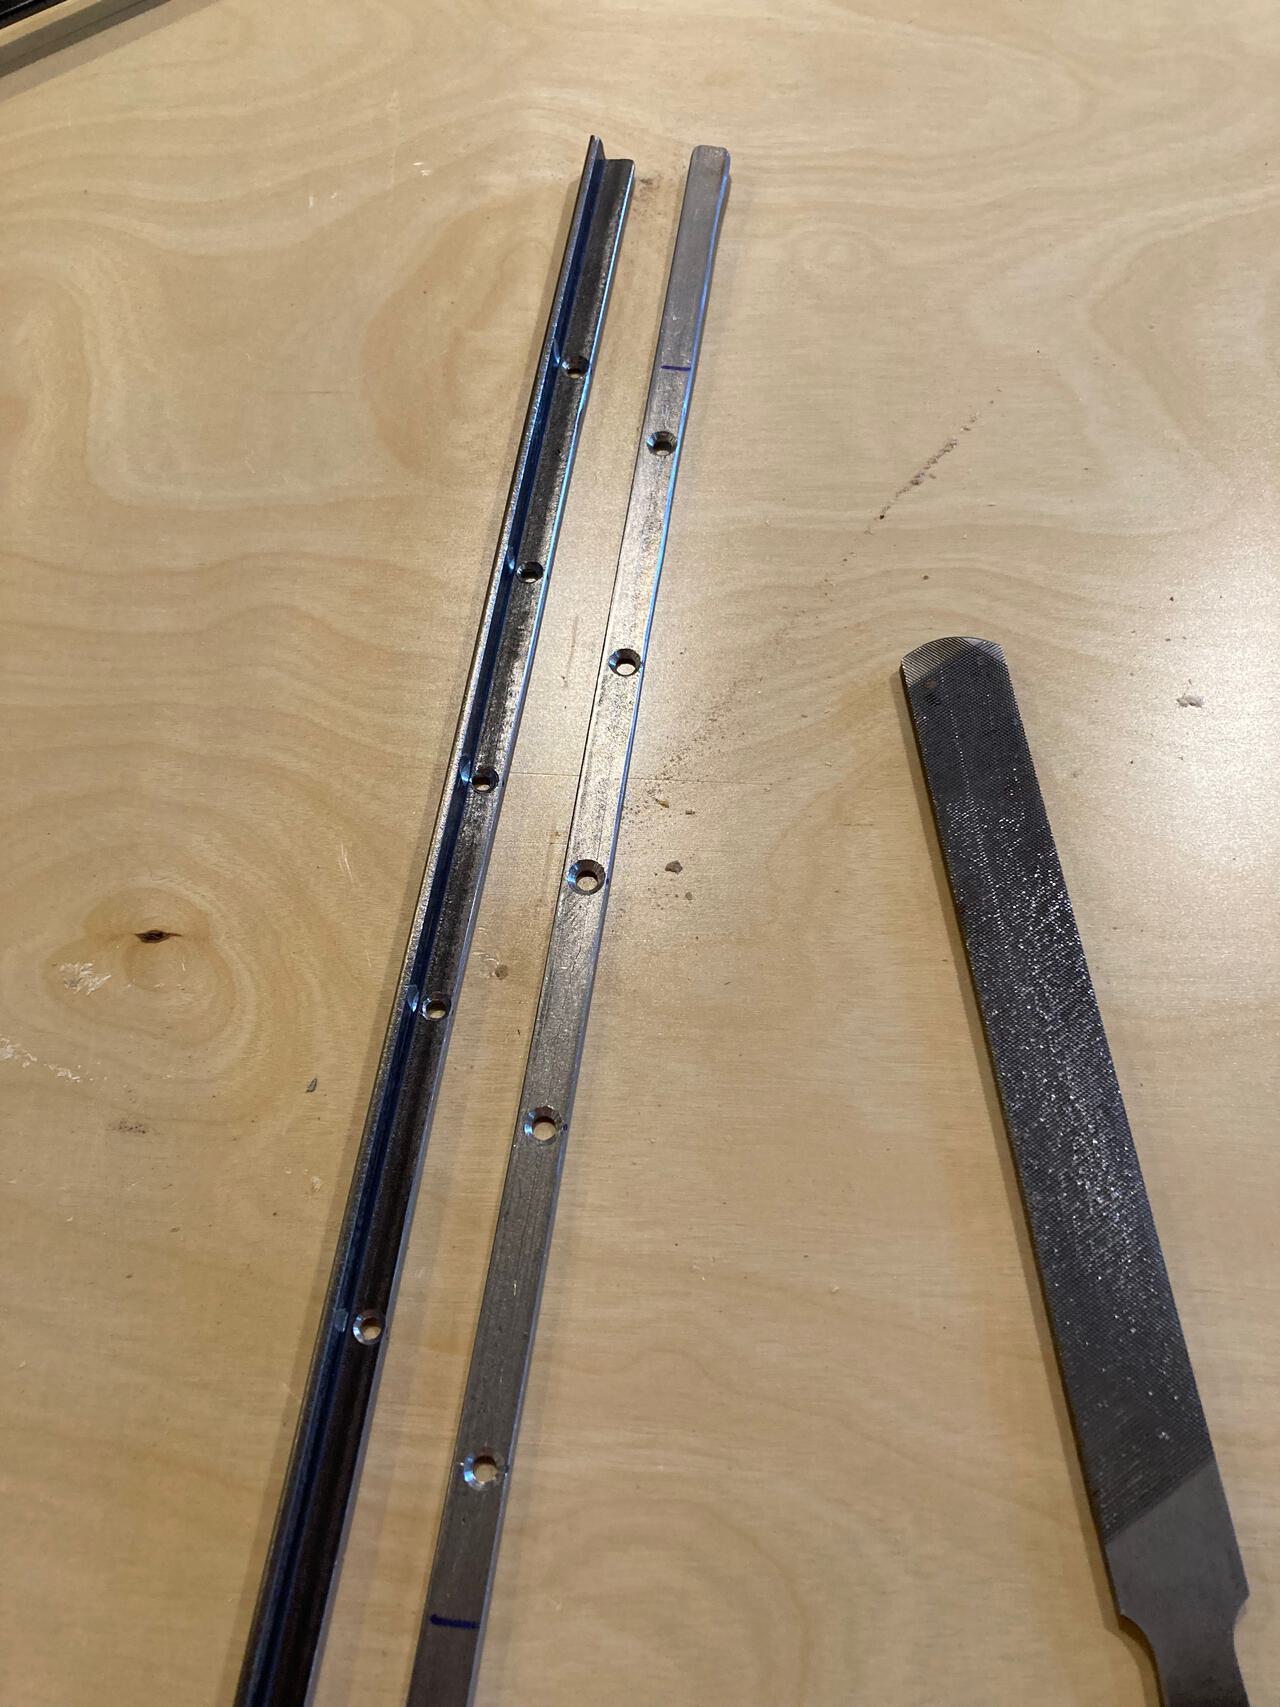 Ground and drilled support bars